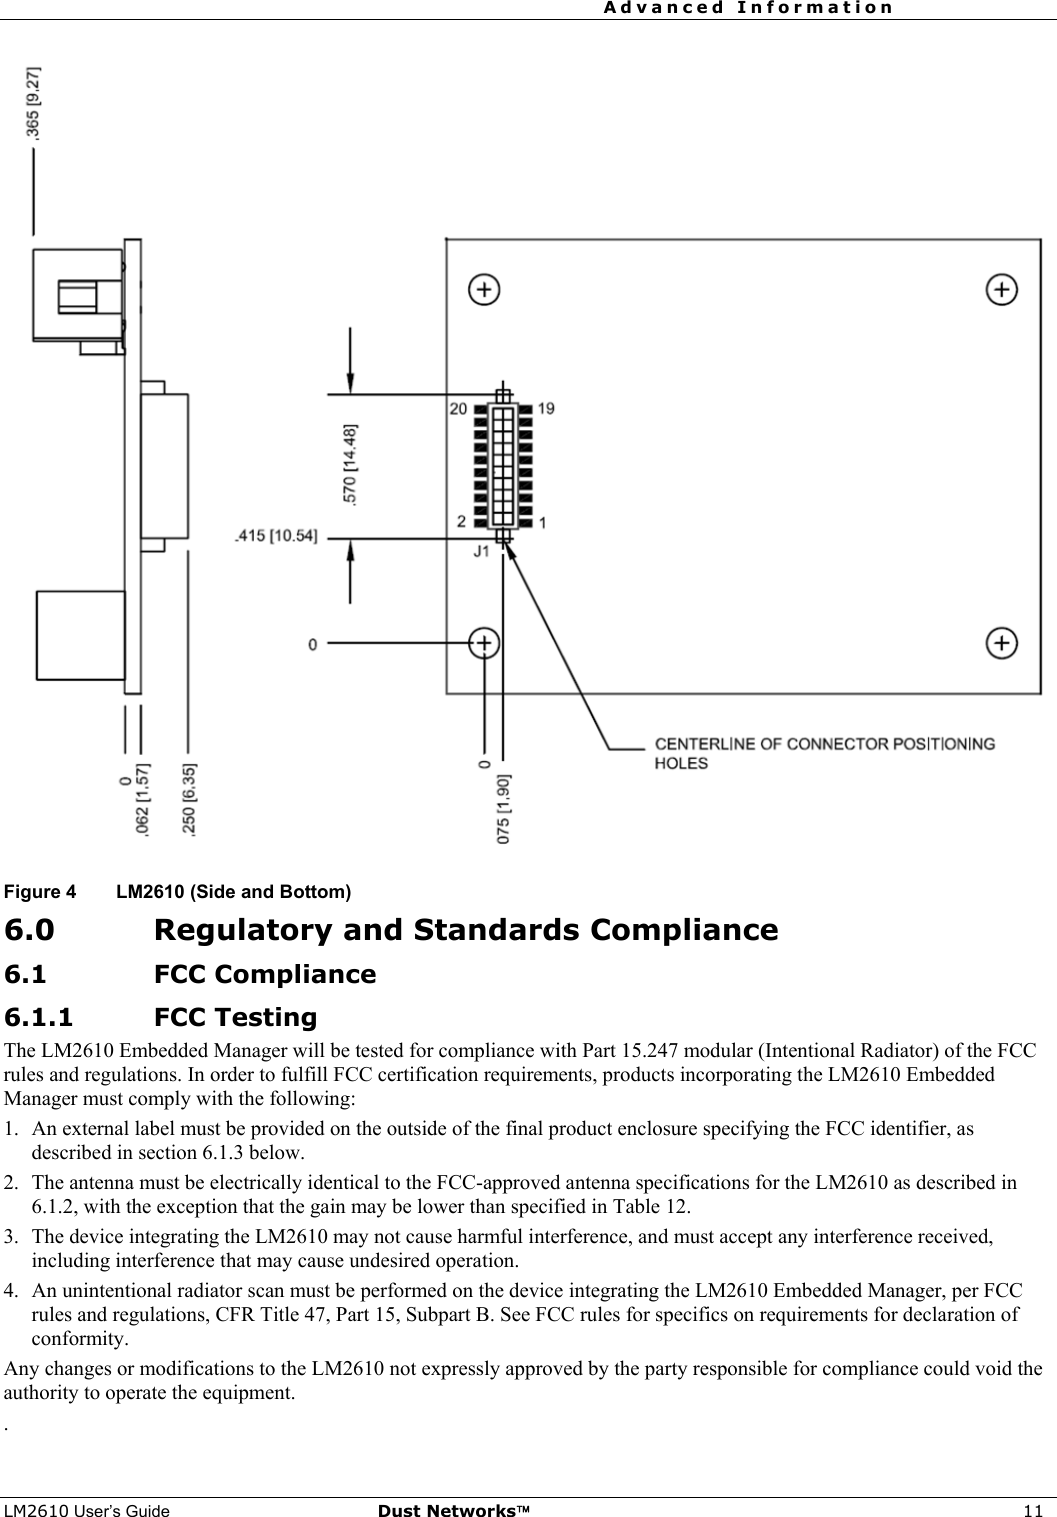 Advanced Information     LM2610 User’s Guide Dust Networks™ 11   Figure 4  LM2610 (Side and Bottom)  6.0 Regulatory and Standards Compliance 6.1 FCC Compliance 6.1.1 FCC Testing The LM2610 Embedded Manager will be tested for compliance with Part 15.247 modular (Intentional Radiator) of the FCC rules and regulations. In order to fulfill FCC certification requirements, products incorporating the LM2610 Embedded Manager must comply with the following: 1.  An external label must be provided on the outside of the final product enclosure specifying the FCC identifier, as described in section 6.1.3 below. 2.  The antenna must be electrically identical to the FCC-approved antenna specifications for the LM2610 as described in 6.1.2, with the exception that the gain may be lower than specified in Table 12. 3.  The device integrating the LM2610 may not cause harmful interference, and must accept any interference received, including interference that may cause undesired operation. 4.  An unintentional radiator scan must be performed on the device integrating the LM2610 Embedded Manager, per FCC rules and regulations, CFR Title 47, Part 15, Subpart B. See FCC rules for specifics on requirements for declaration of conformity. Any changes or modifications to the LM2610 not expressly approved by the party responsible for compliance could void the authority to operate the equipment. . 